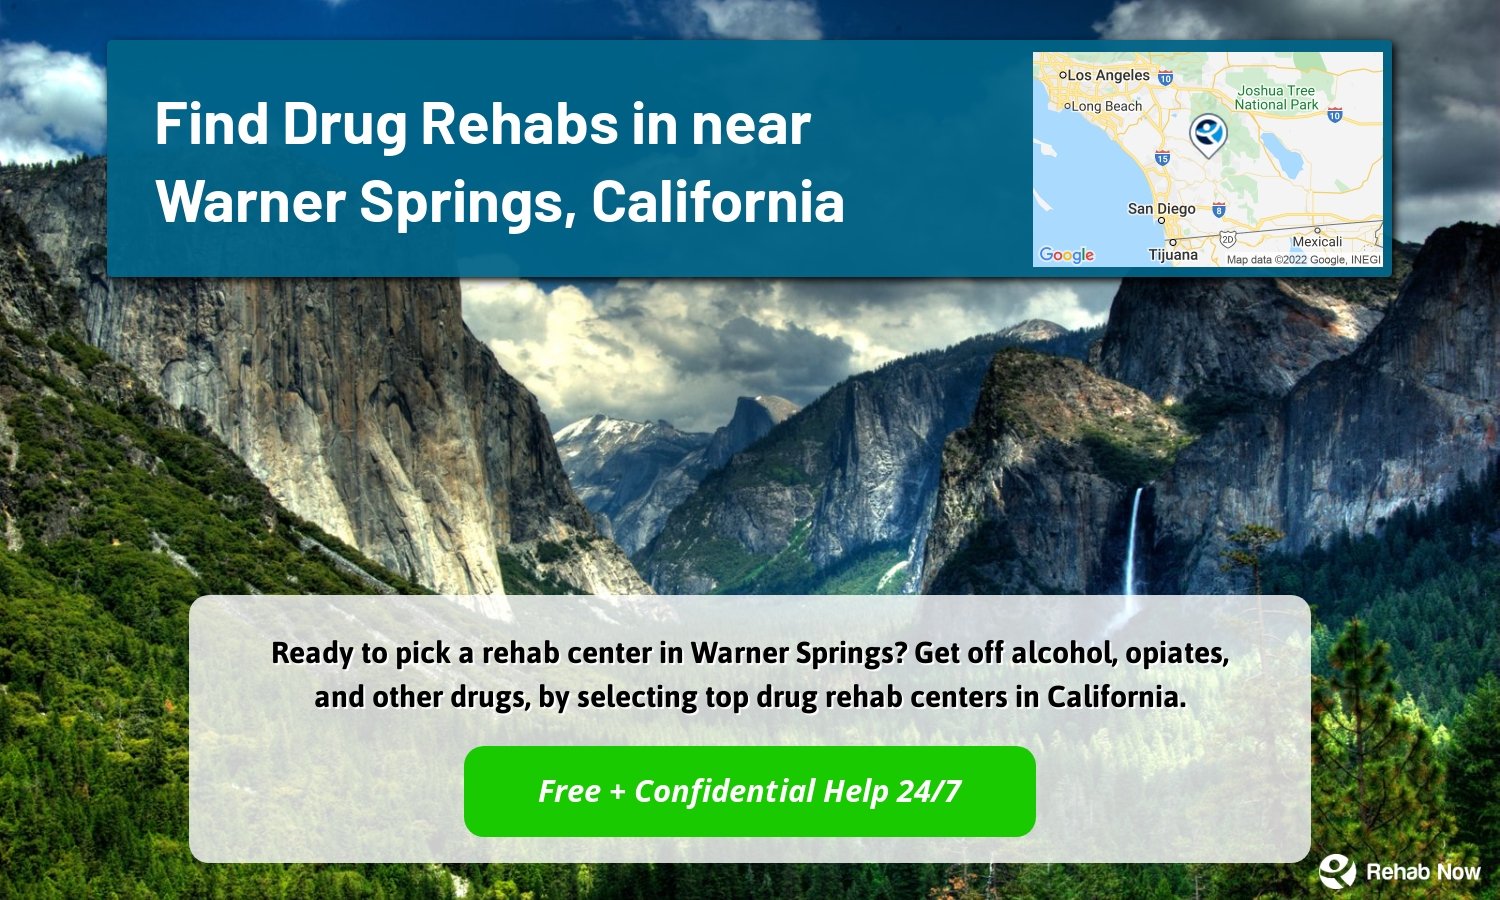 Ready to pick a rehab center in Warner Springs? Get off alcohol, opiates, and other drugs, by selecting top drug rehab centers in California.